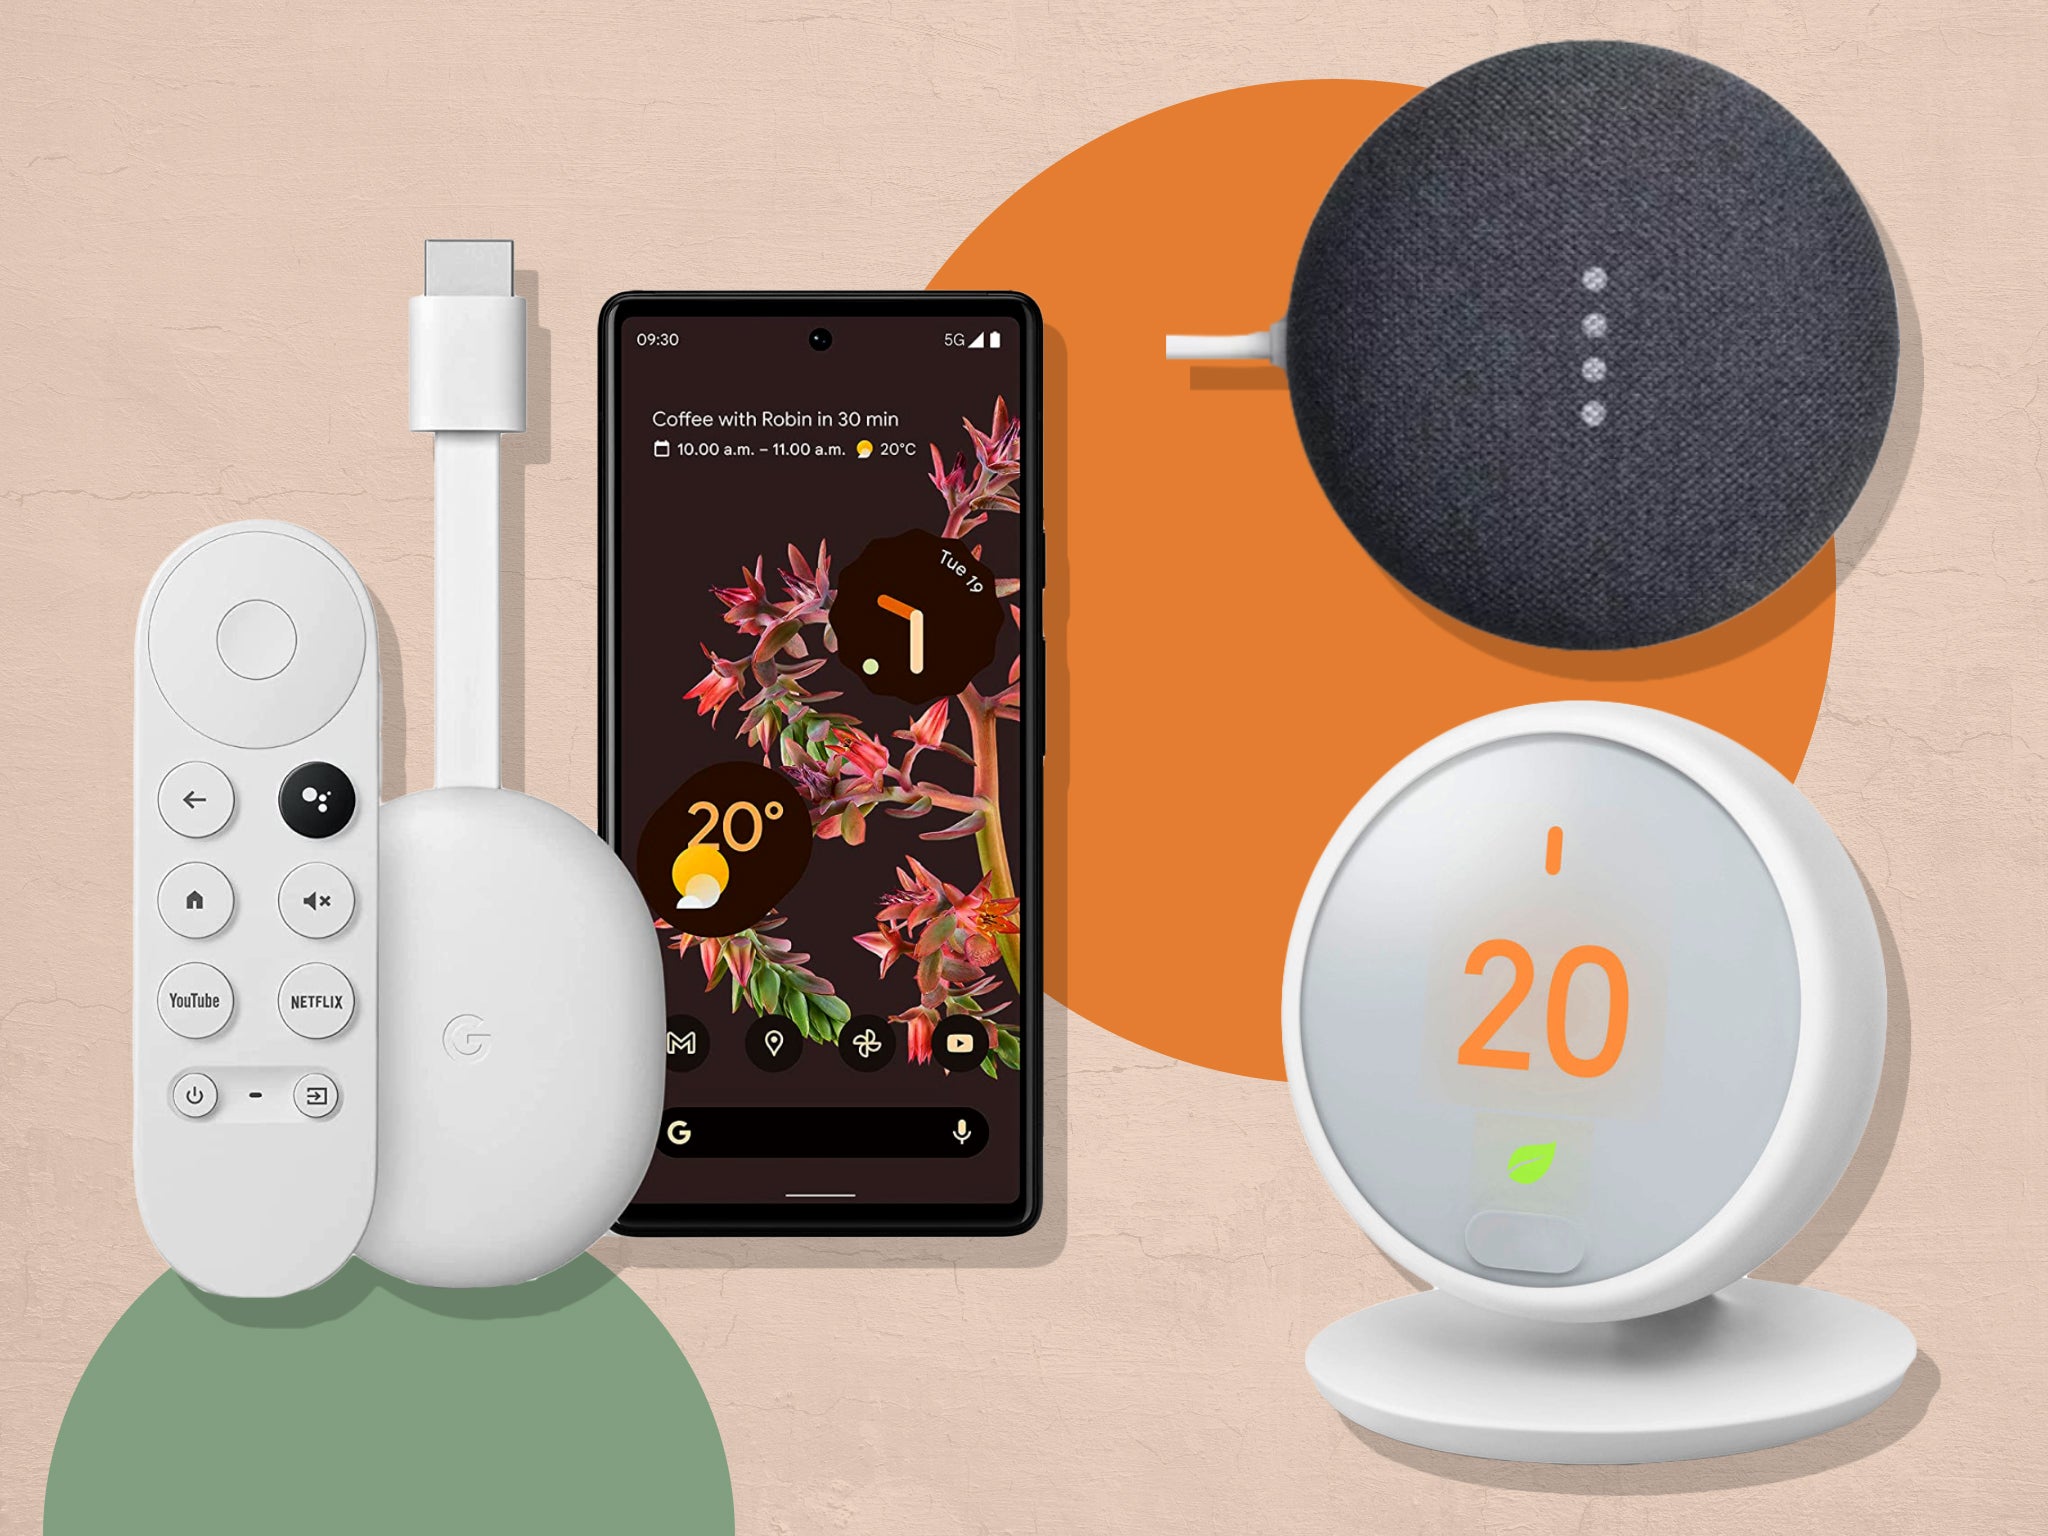 The discounts include a half-price Nest smart thermostat